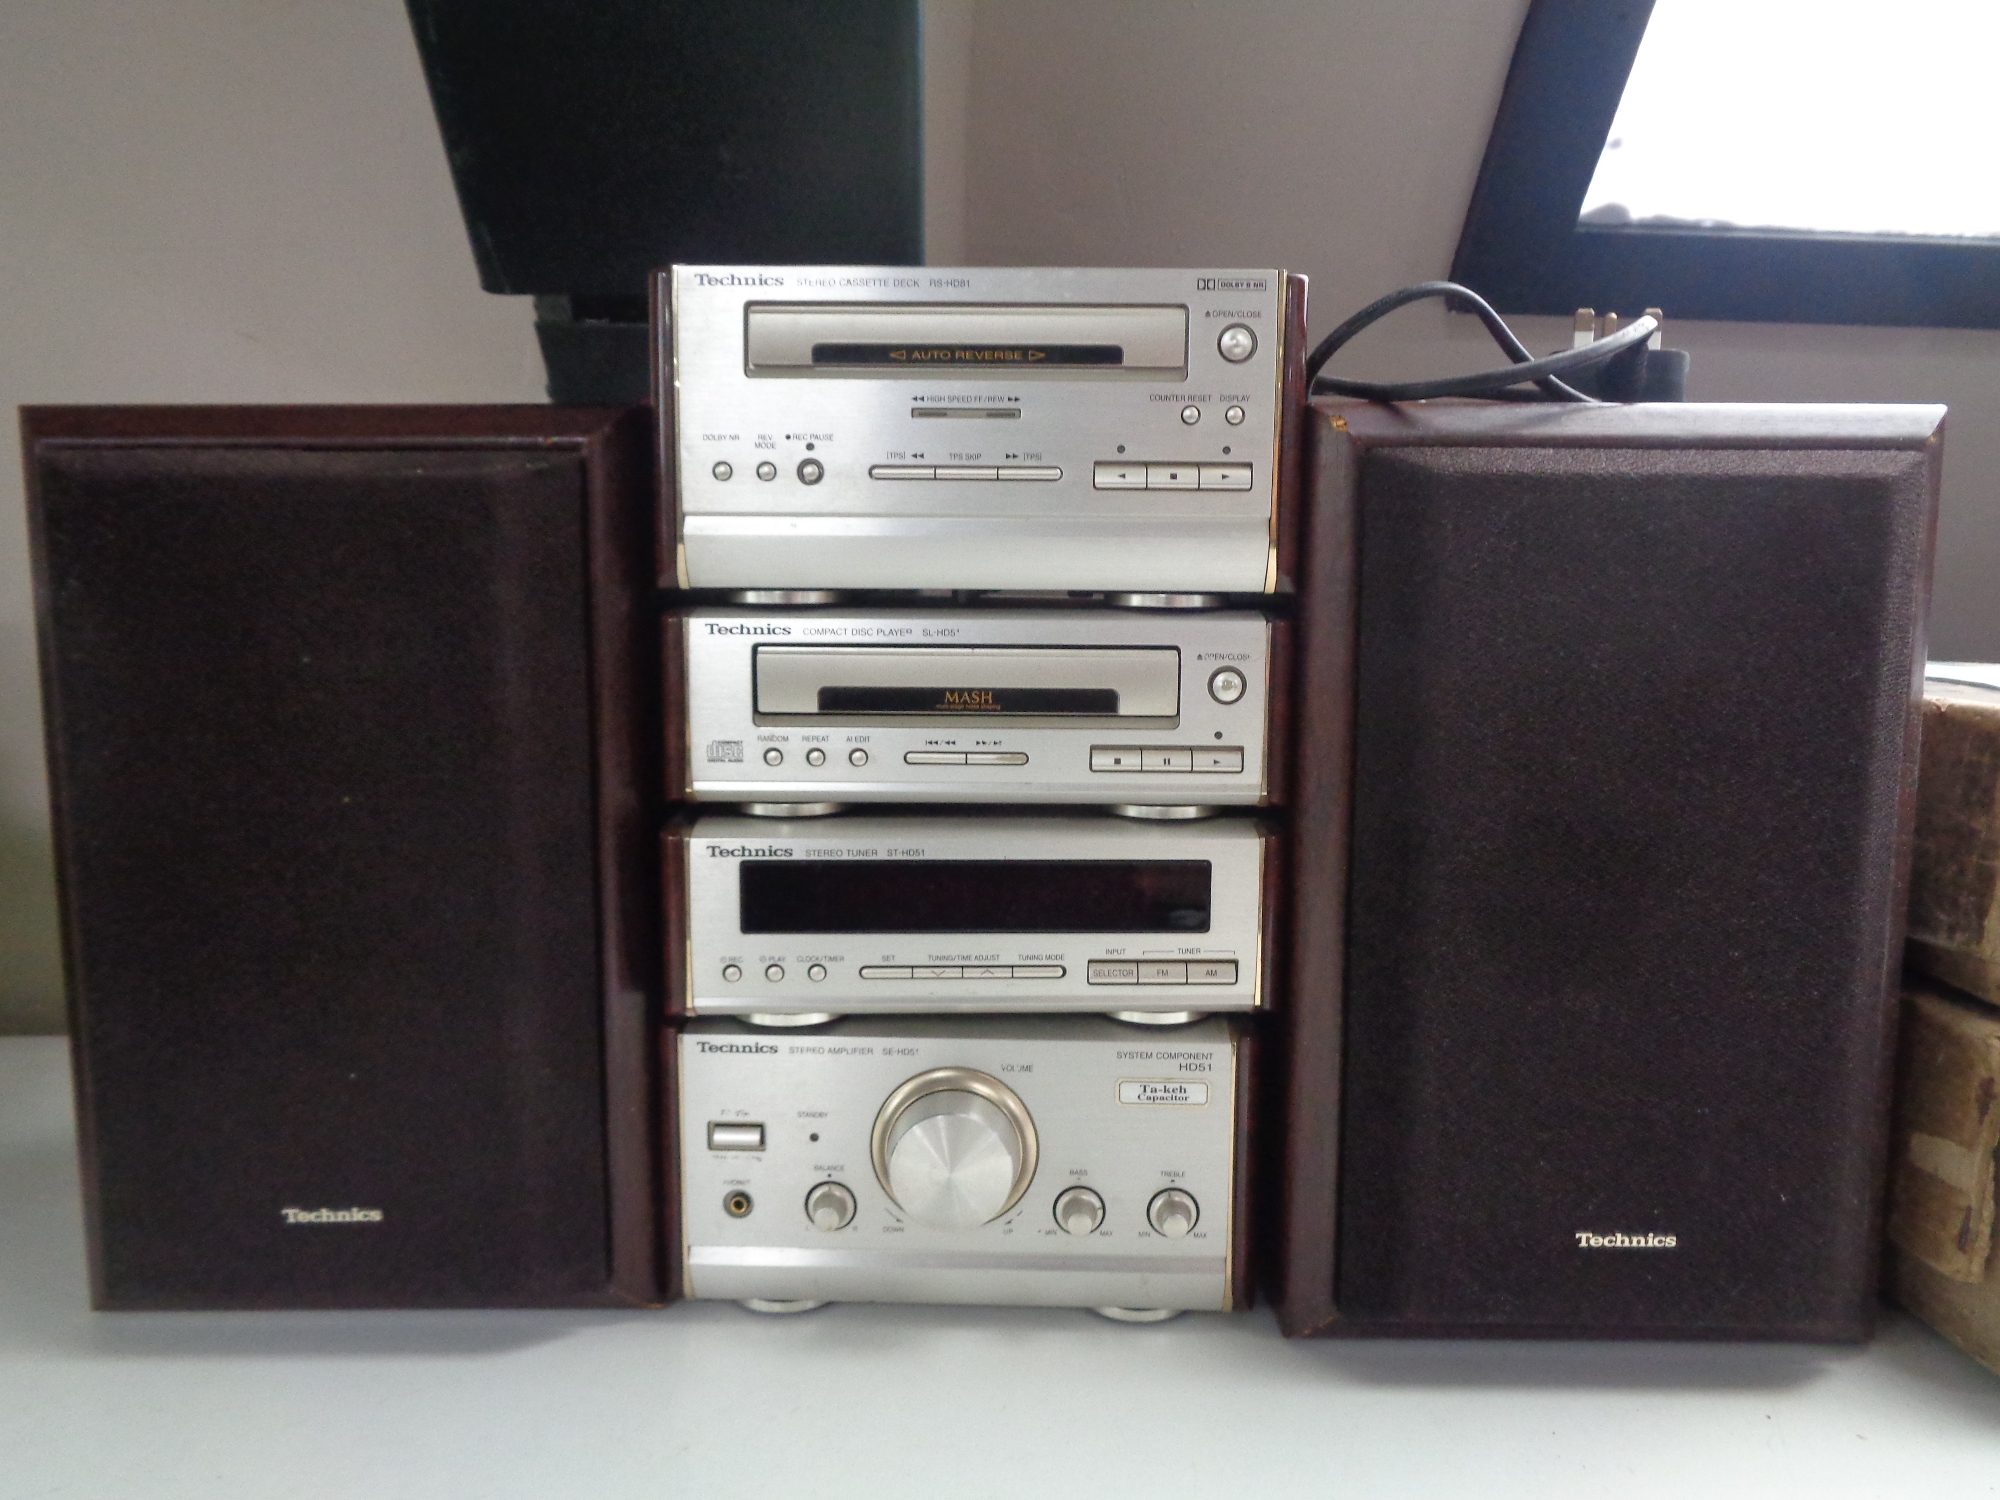 A Technics Hifi system with speakers